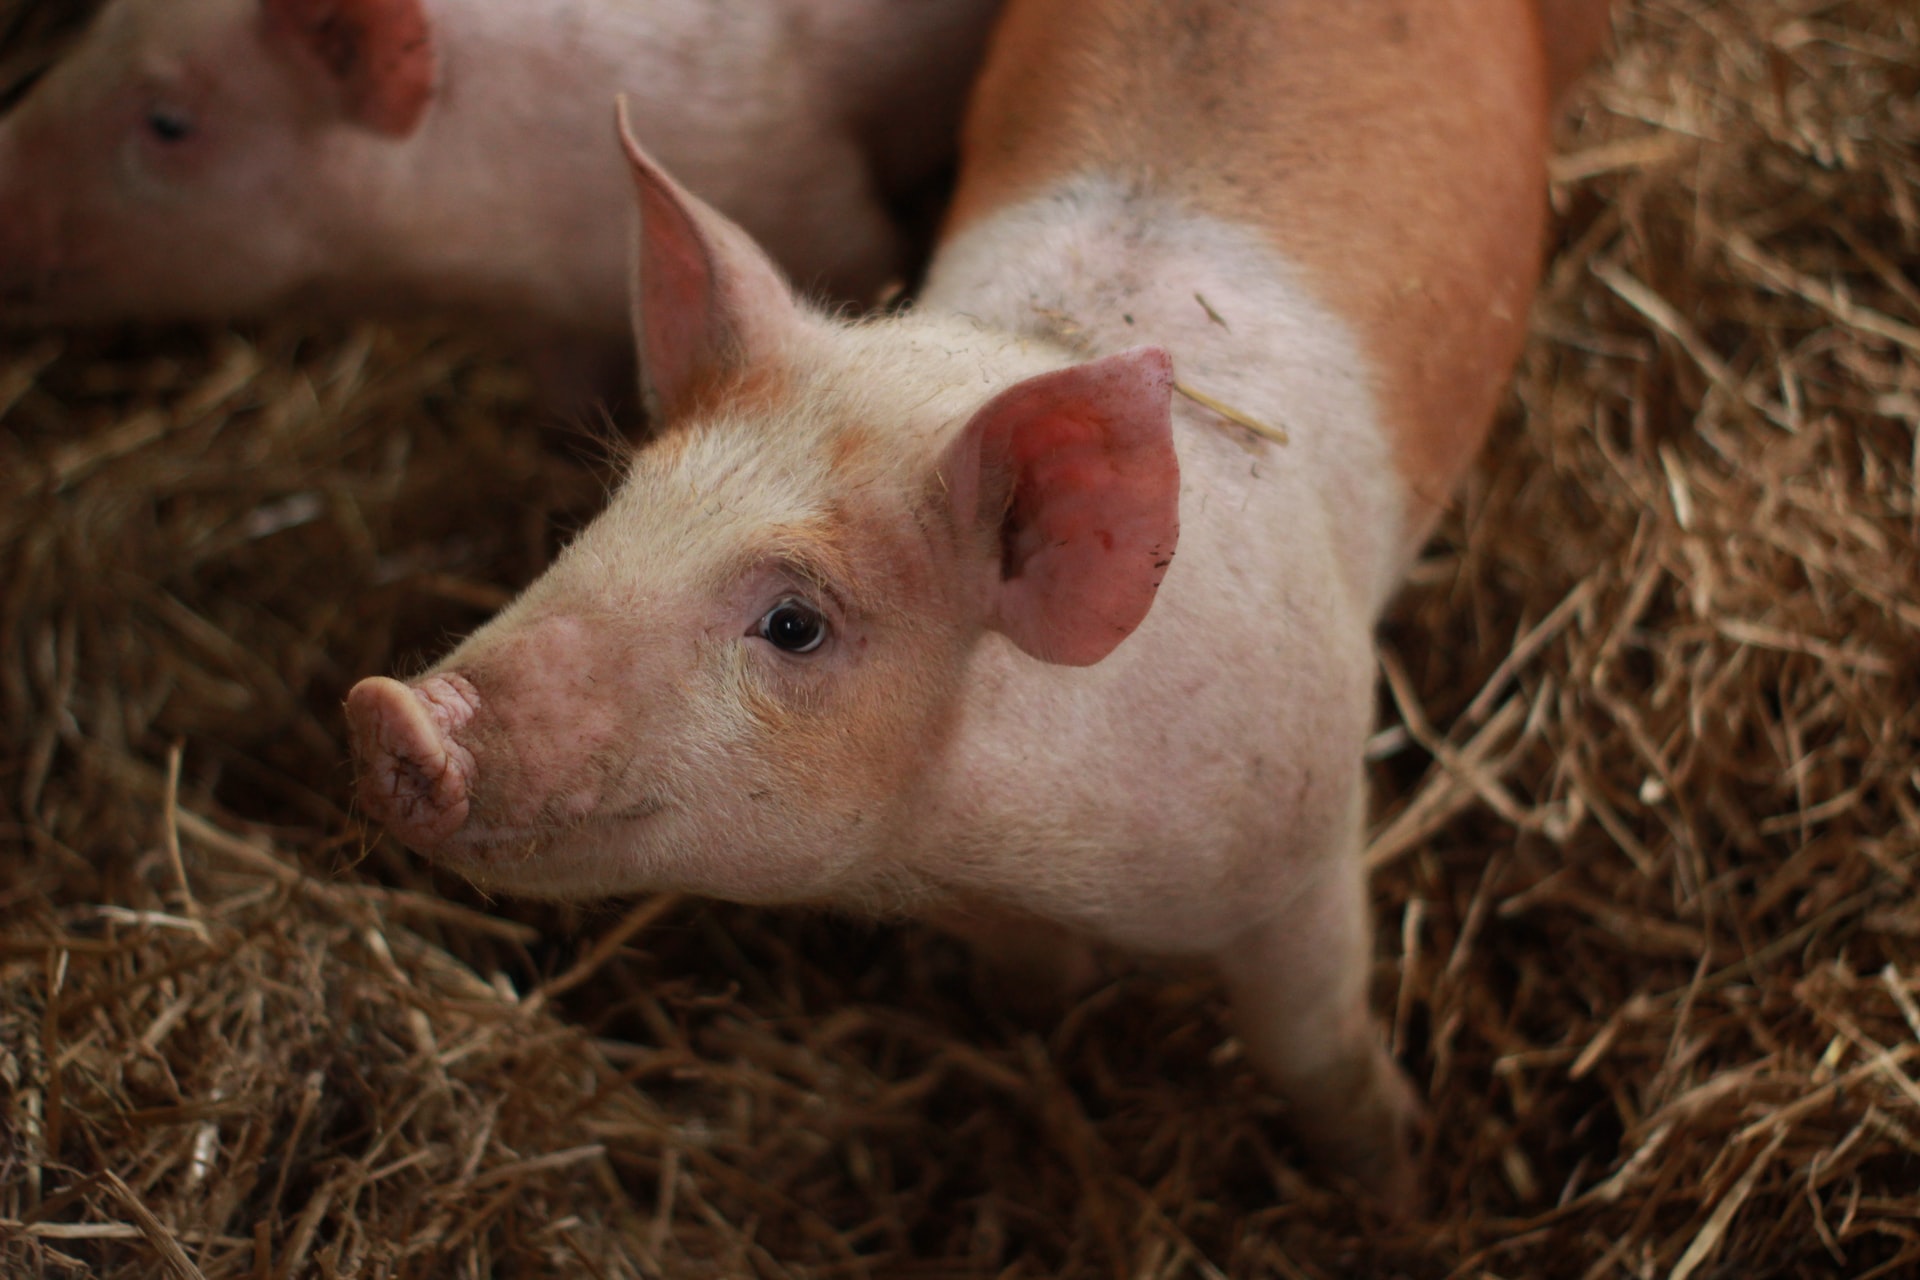 The first patient to have a heart transplant from a pig - died after a few months